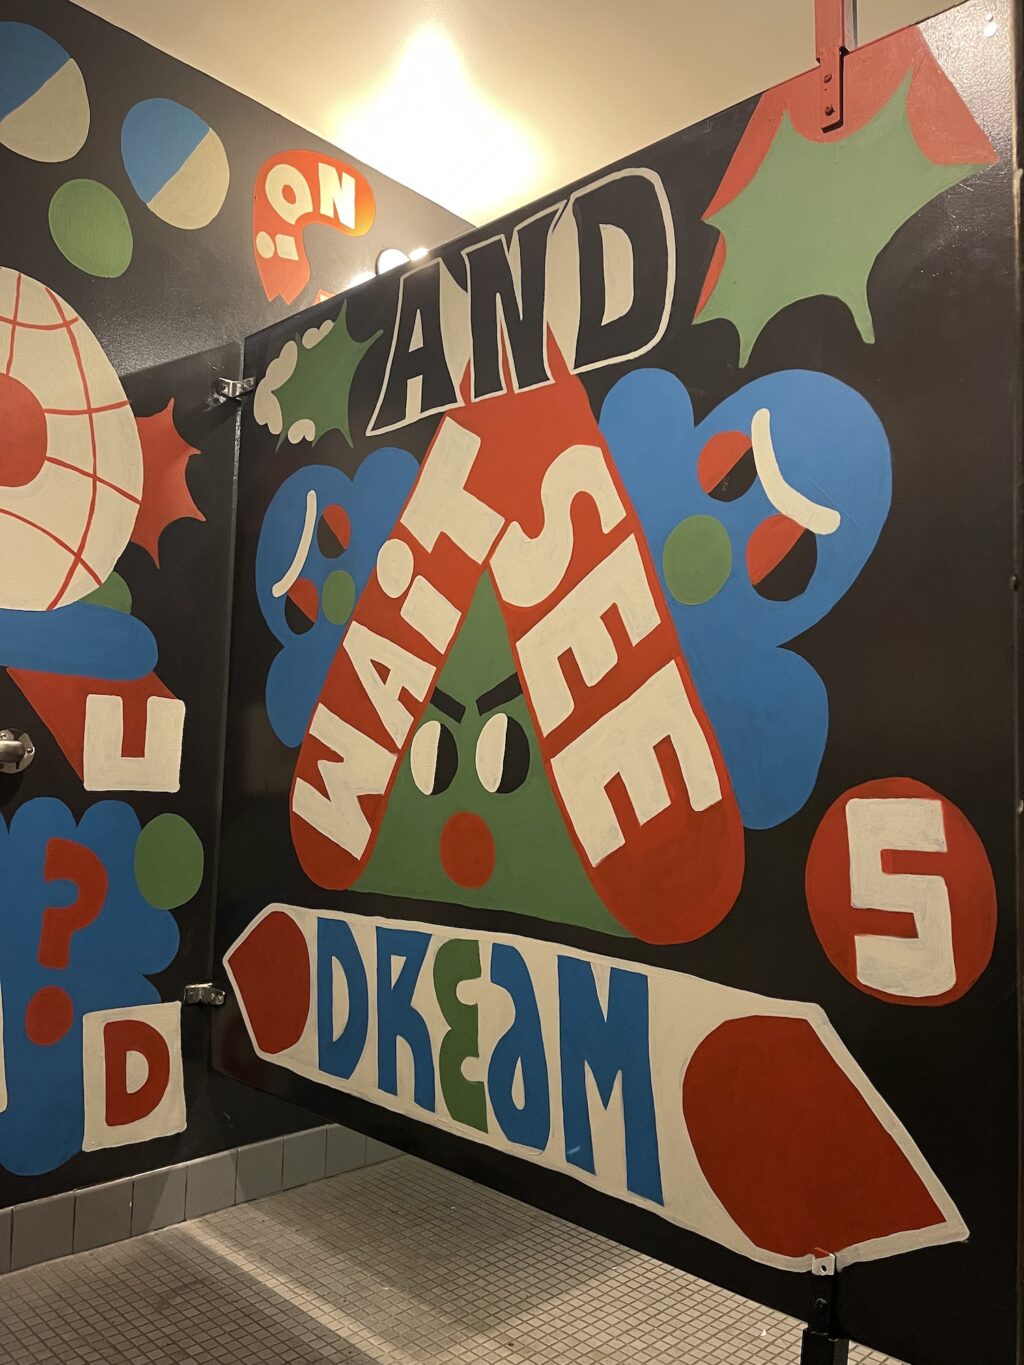 A text based blue, red, green, black and white text bubble mural in the SPACE bathroom that says "Wait and See" and "Dream" 